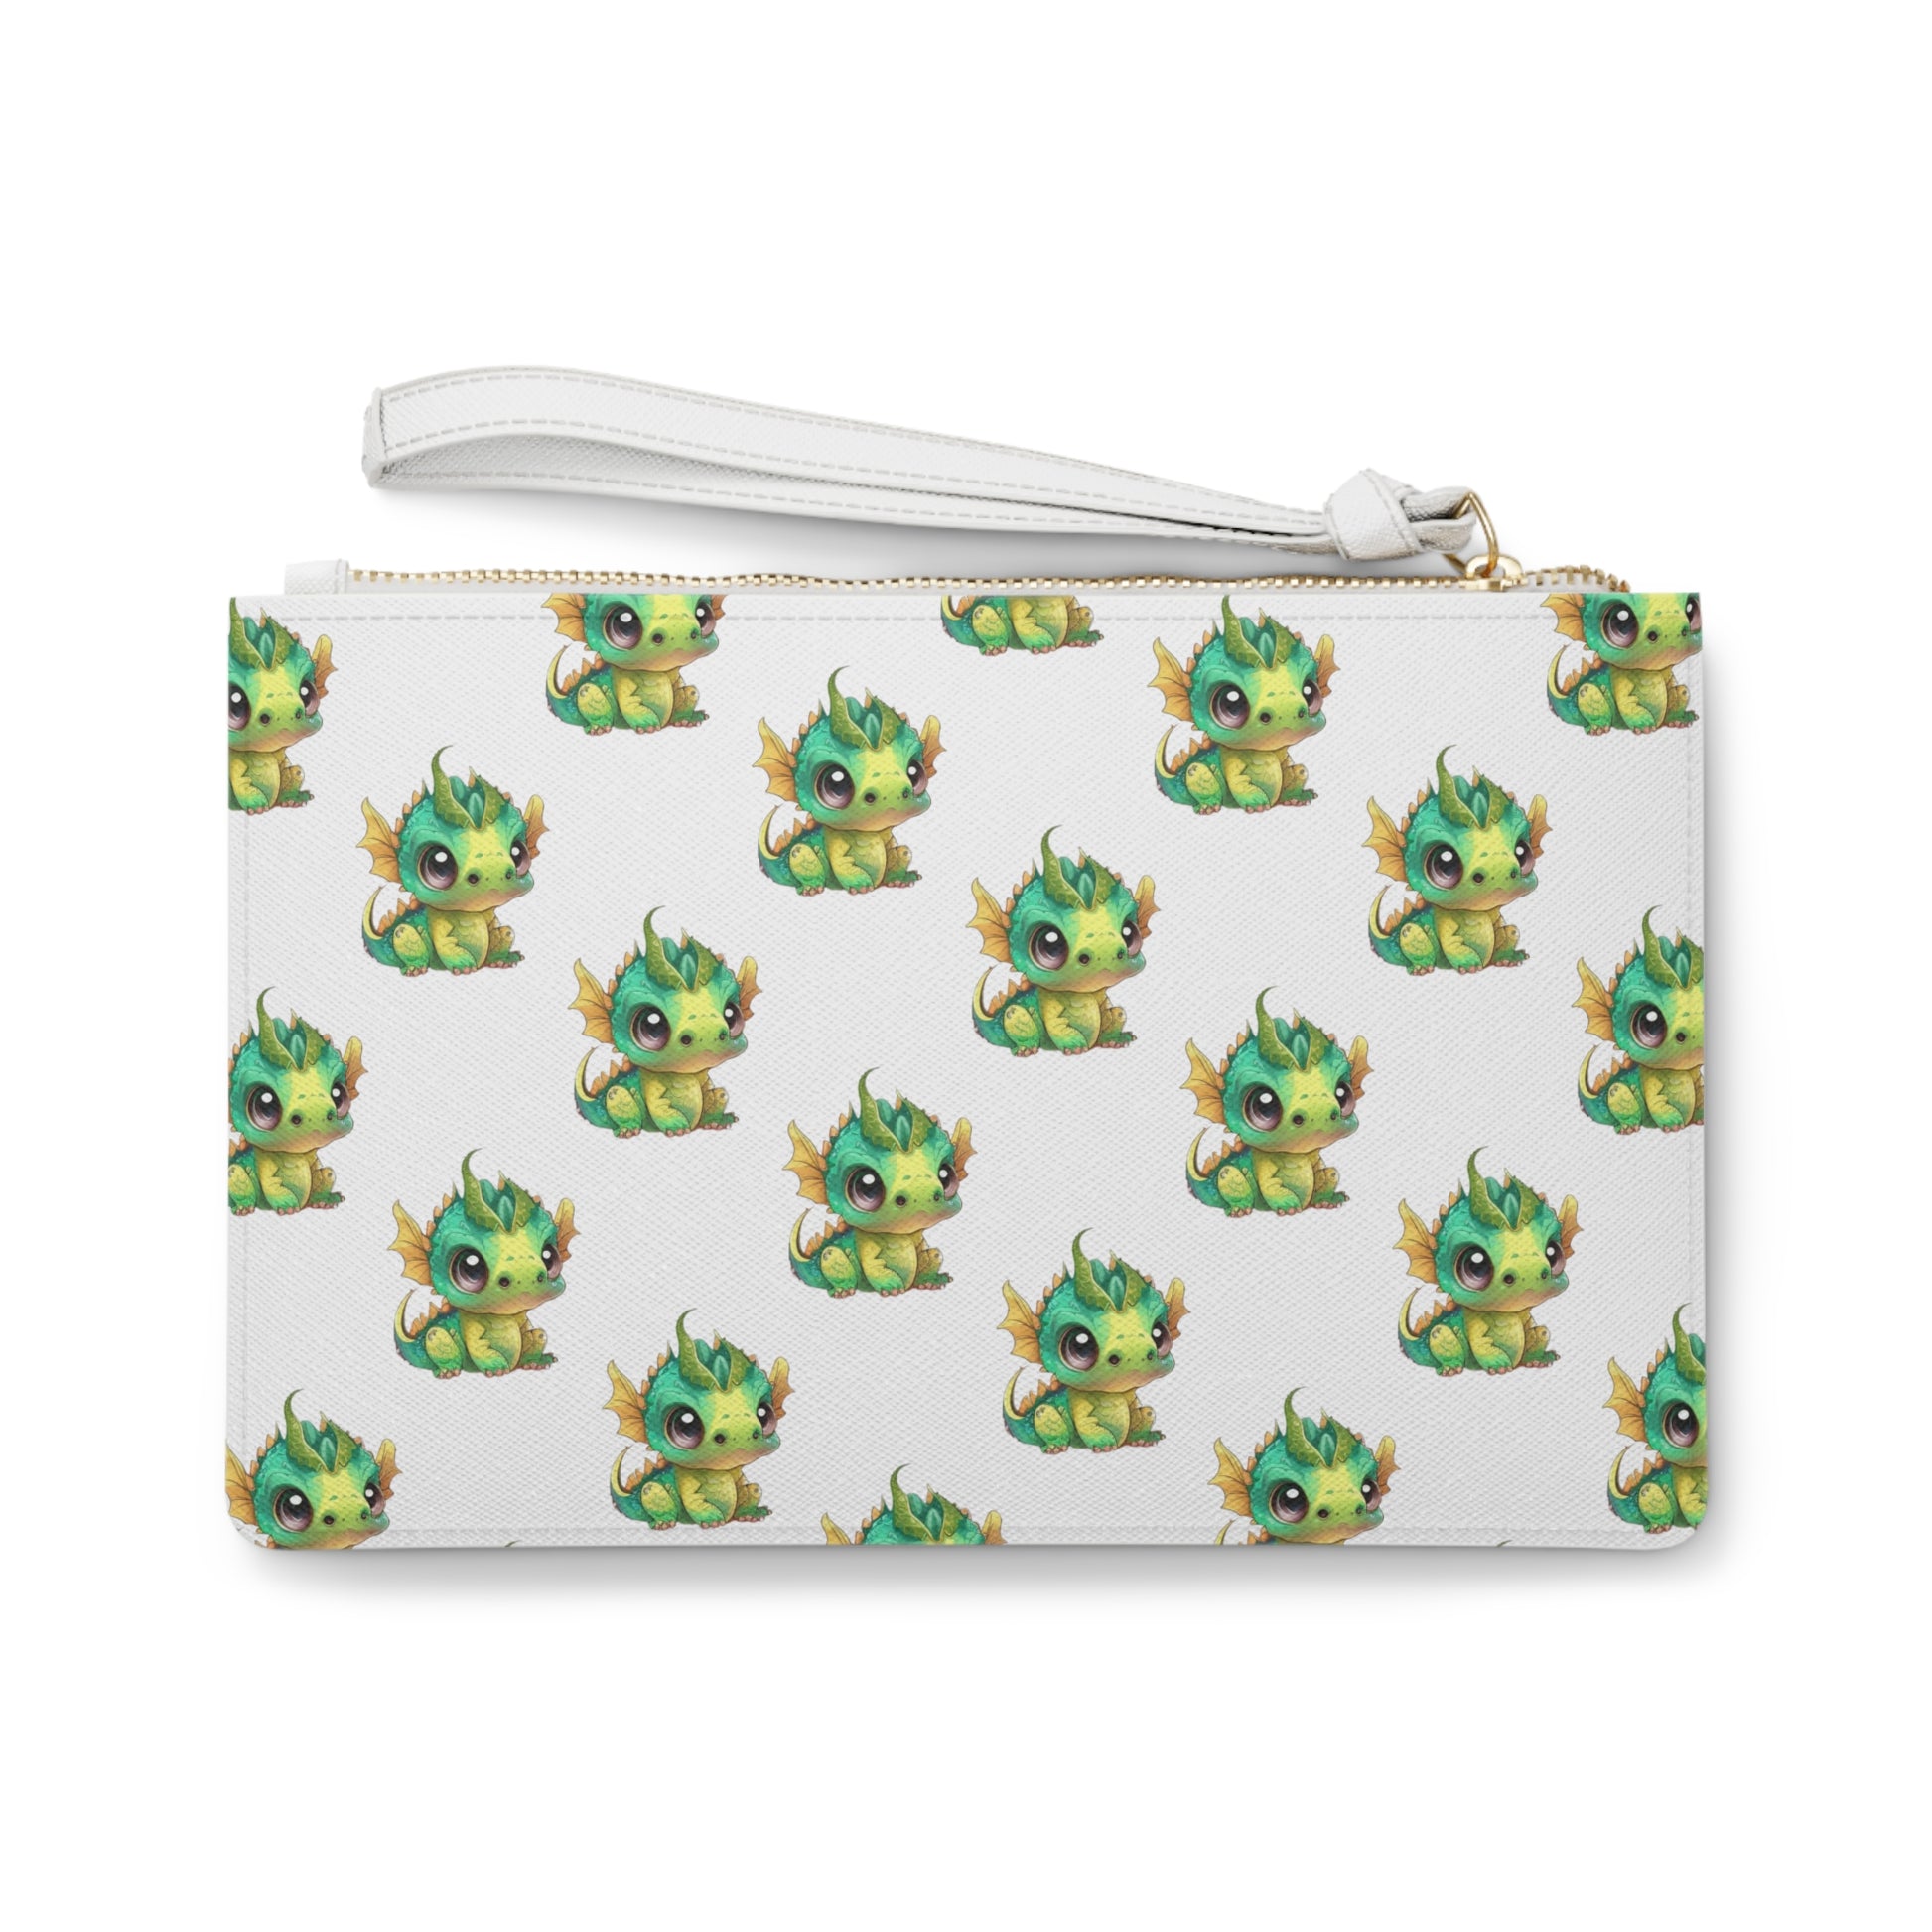 Baby Dragon is the decorative text above 2 darling baby Bobby dragons facing each other - Bobby is in greens and yellows with a little green horn popping out of his cute head - on a white vegan leather sofino patterned clutch bag with a loop white handle and gold zipper - excellent quality! The back of the clutch has little baby Bobby dragons all over it an inch apart.